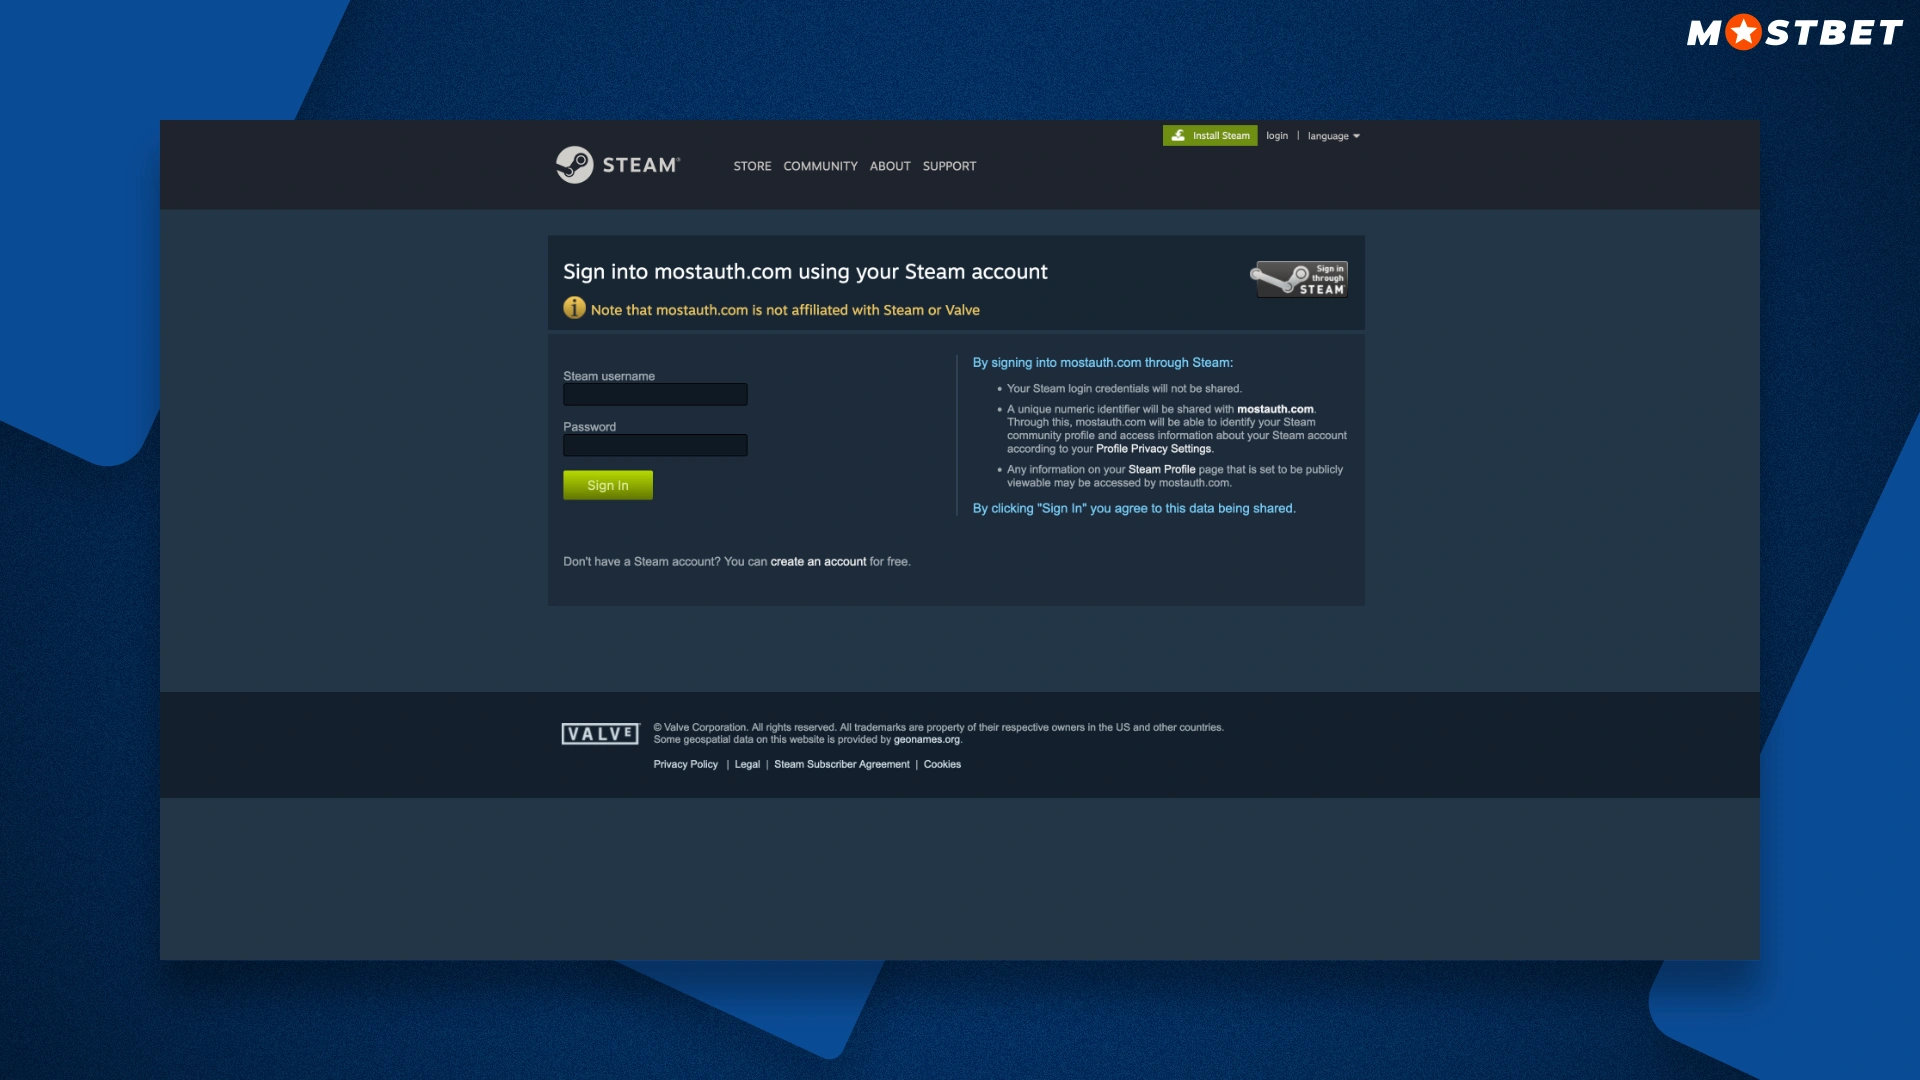 registering at the mostbet bookie via steam